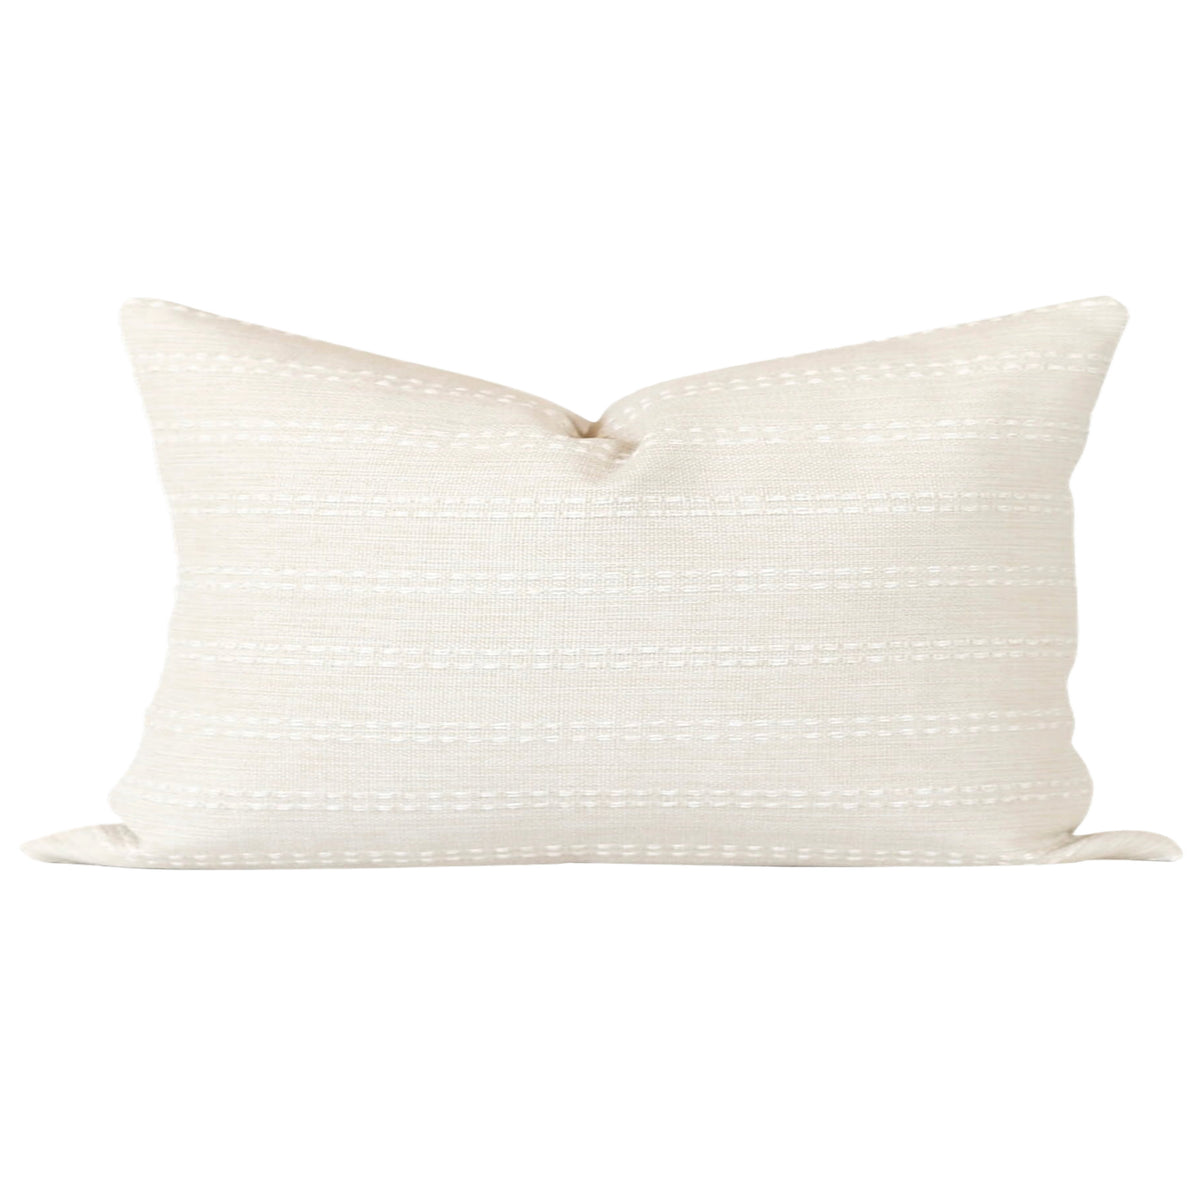 Stella Pillow Cover